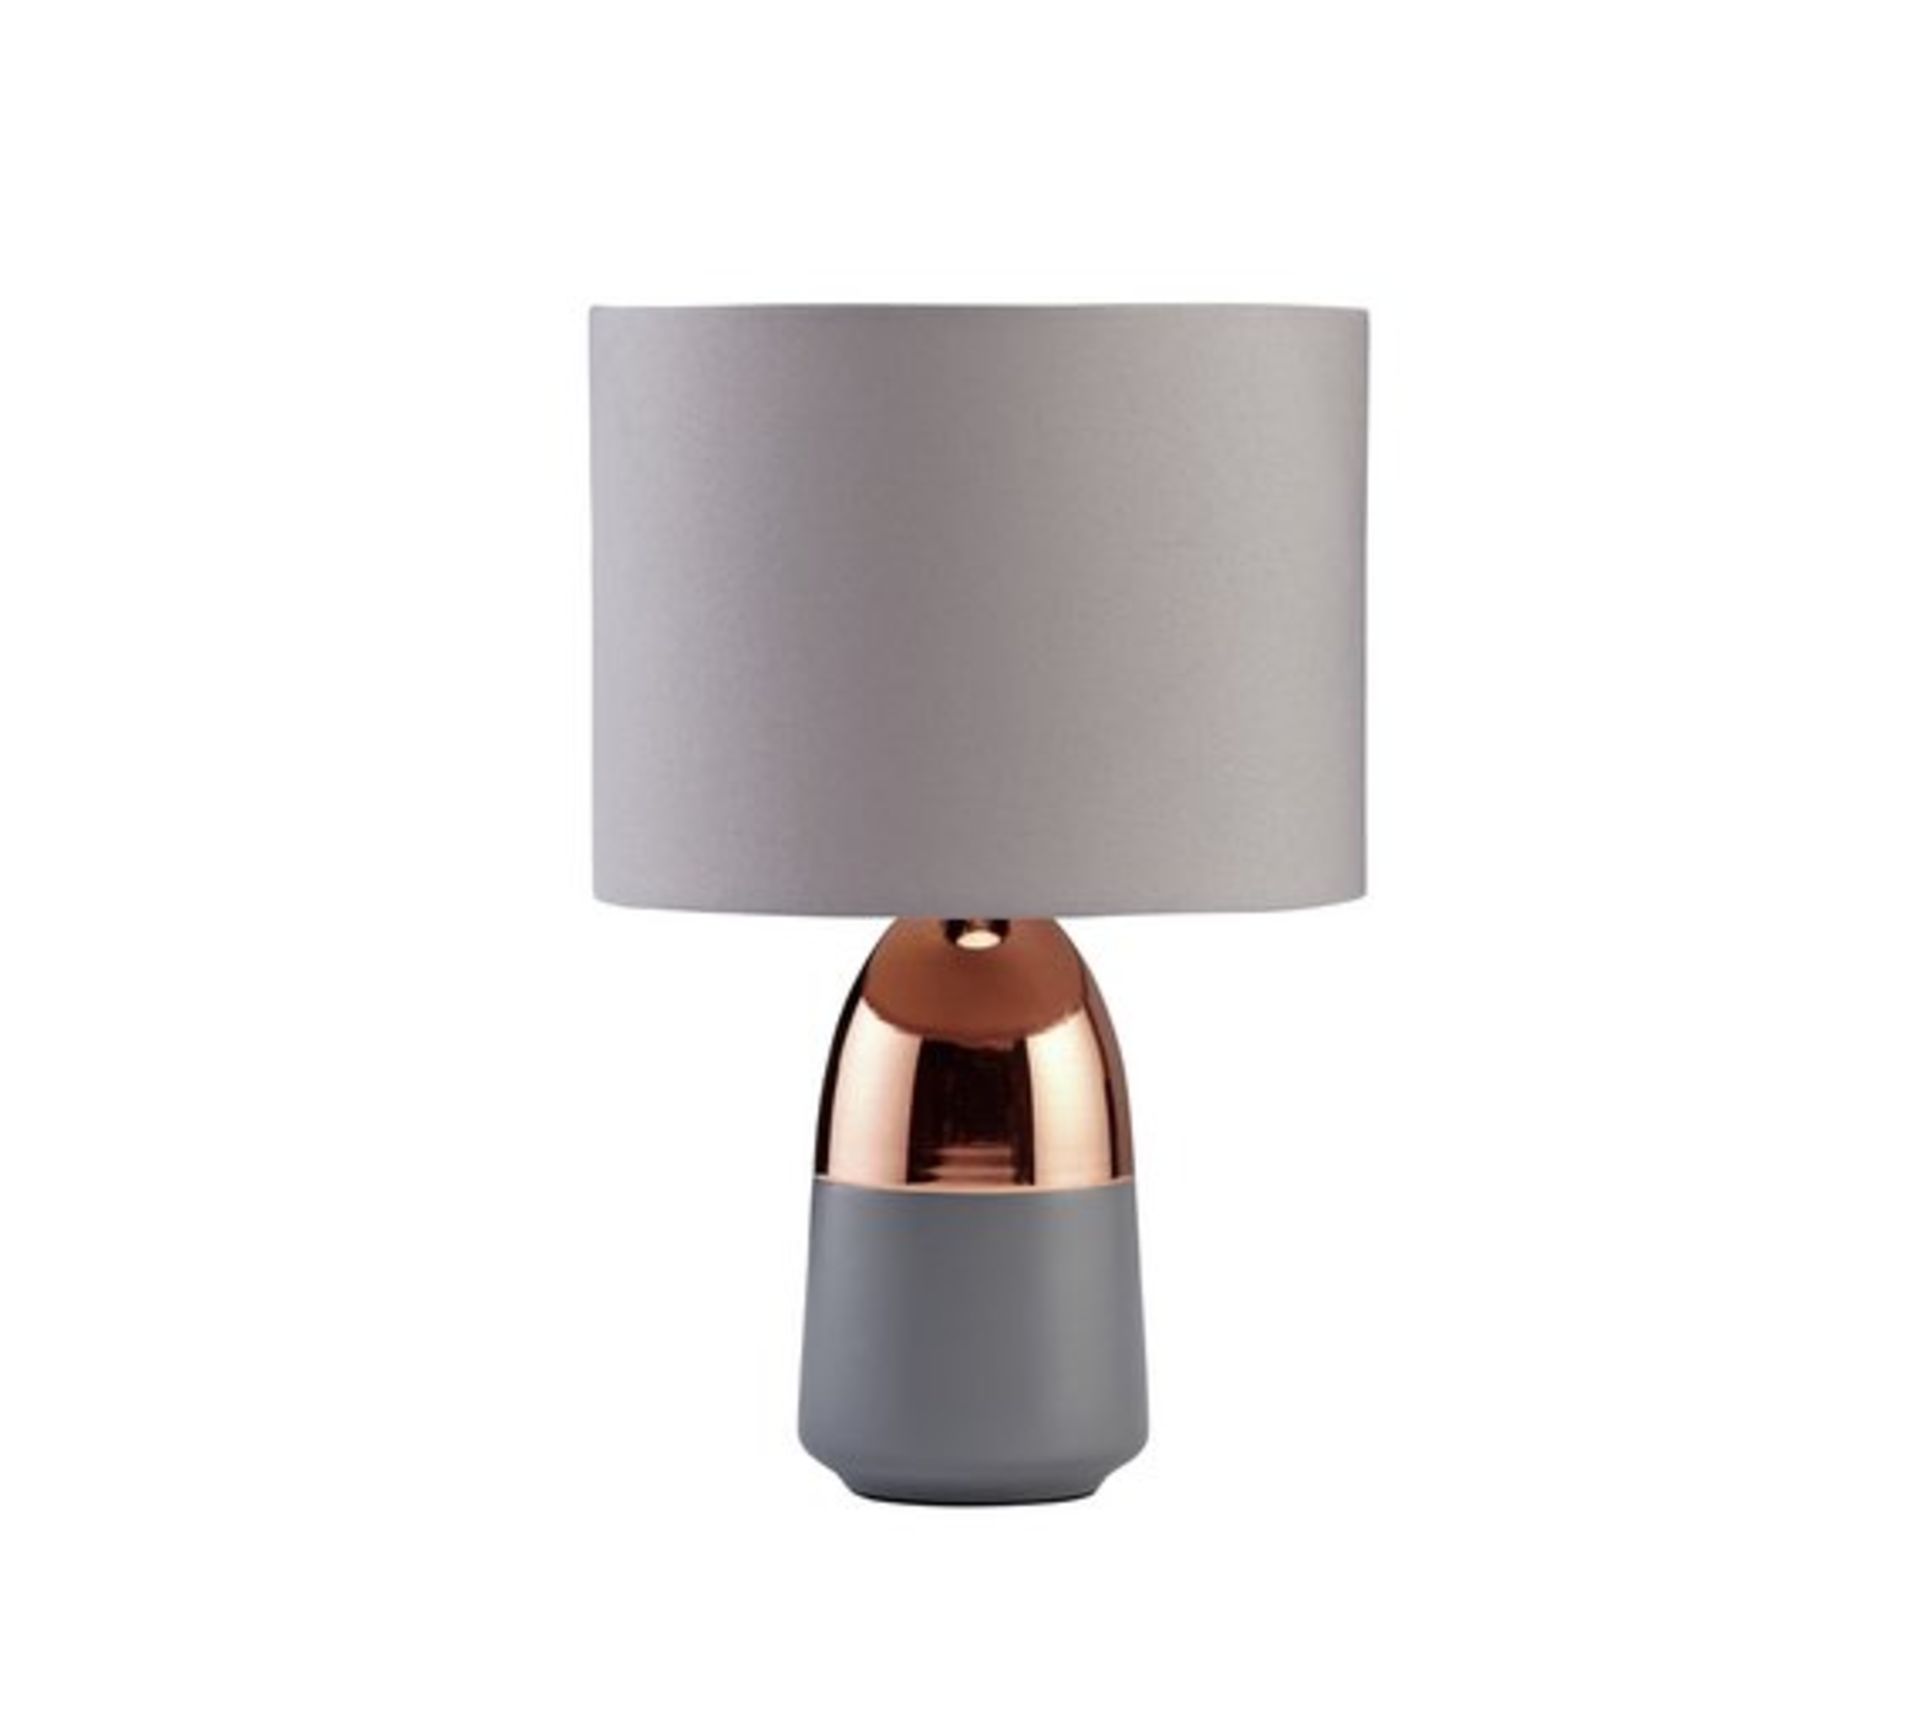 1 BOXED CHECKED AND REFURBISHED ARGOS DUNO TOUCH LAMP IN GREY AND COPPER (NO VAT)